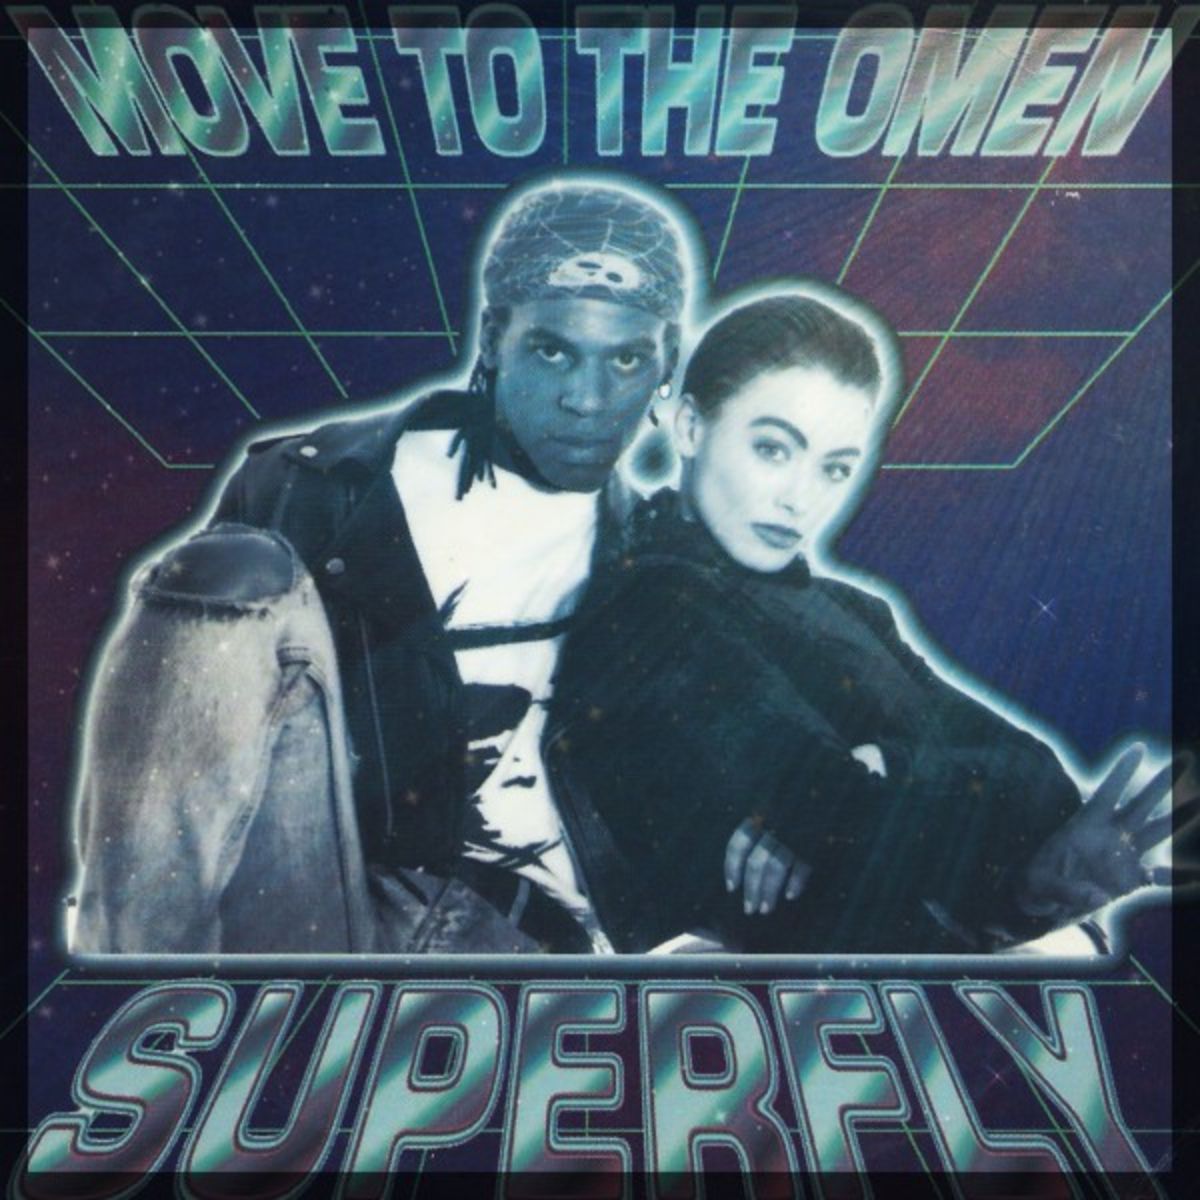 Superfly - Move to the Omen (Web Single) (1995) FLAC